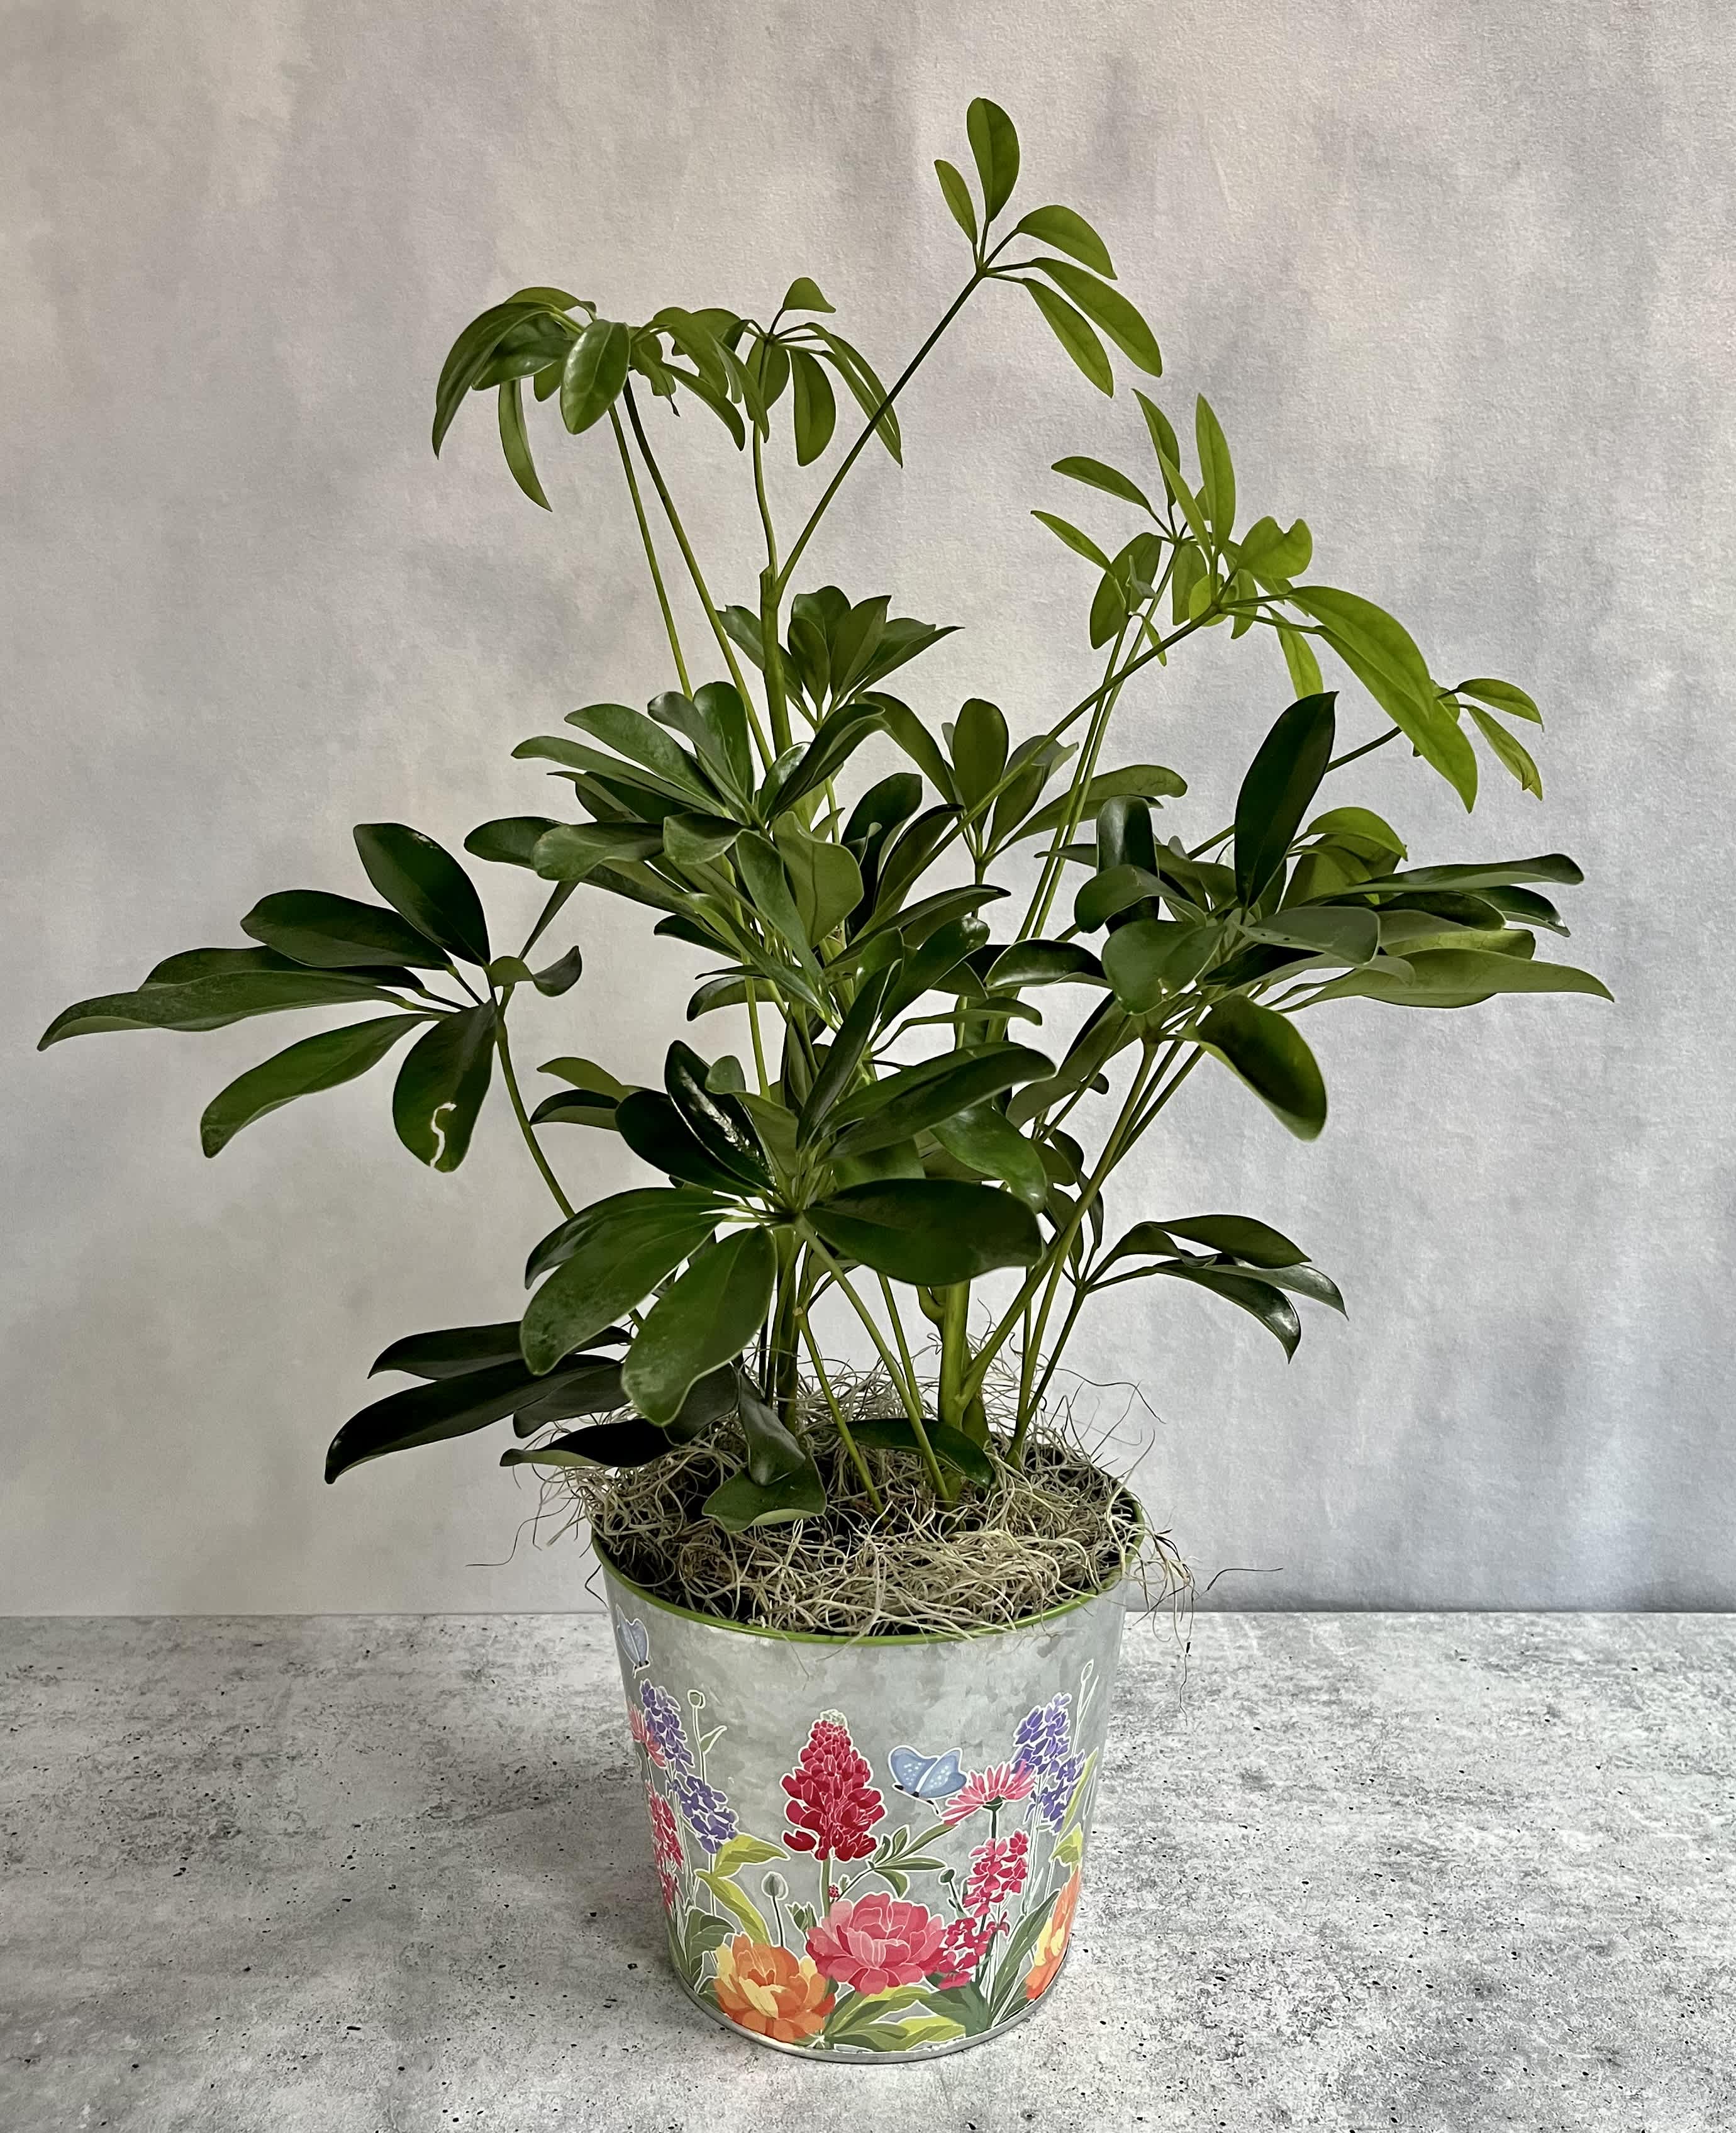 6” Shefflera Arbicola  - A 6” diameter pot, comes in the decorative container. A regular basket or other seasonal container can be used as well. This plant is very easy to care for! 